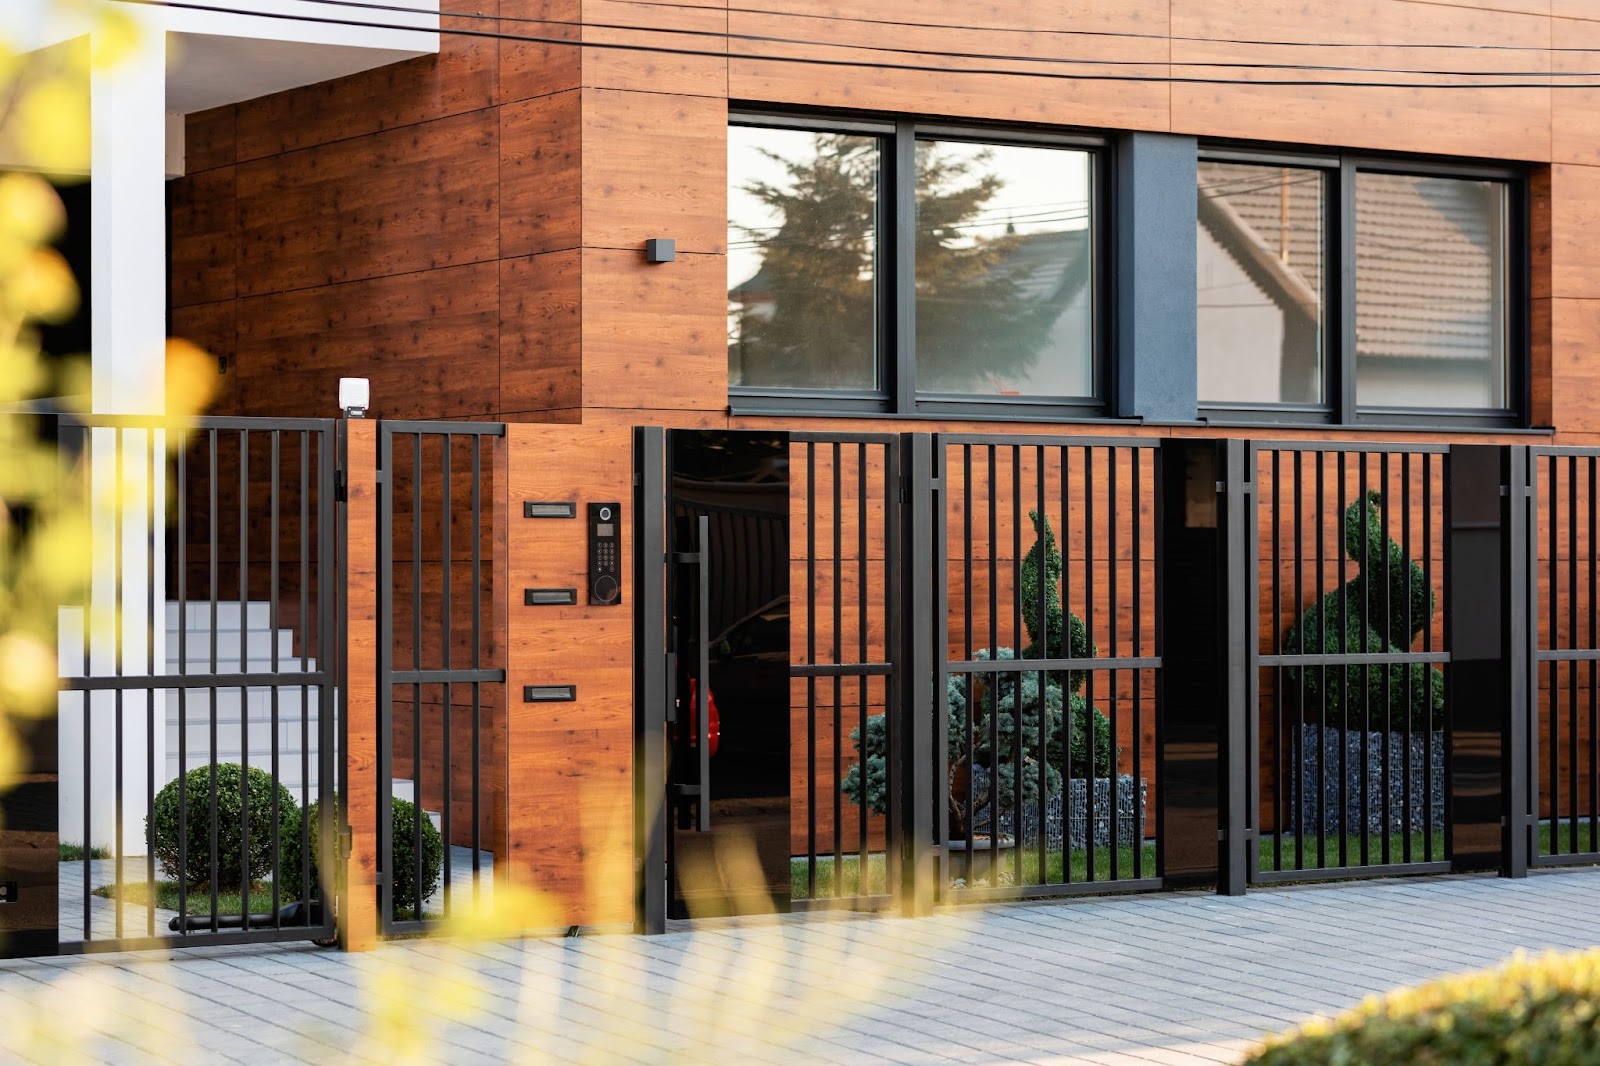 Exterior view of a modern brown residential building featuring a sleek black steel gate adorned with two sculpted plants at the entrance.